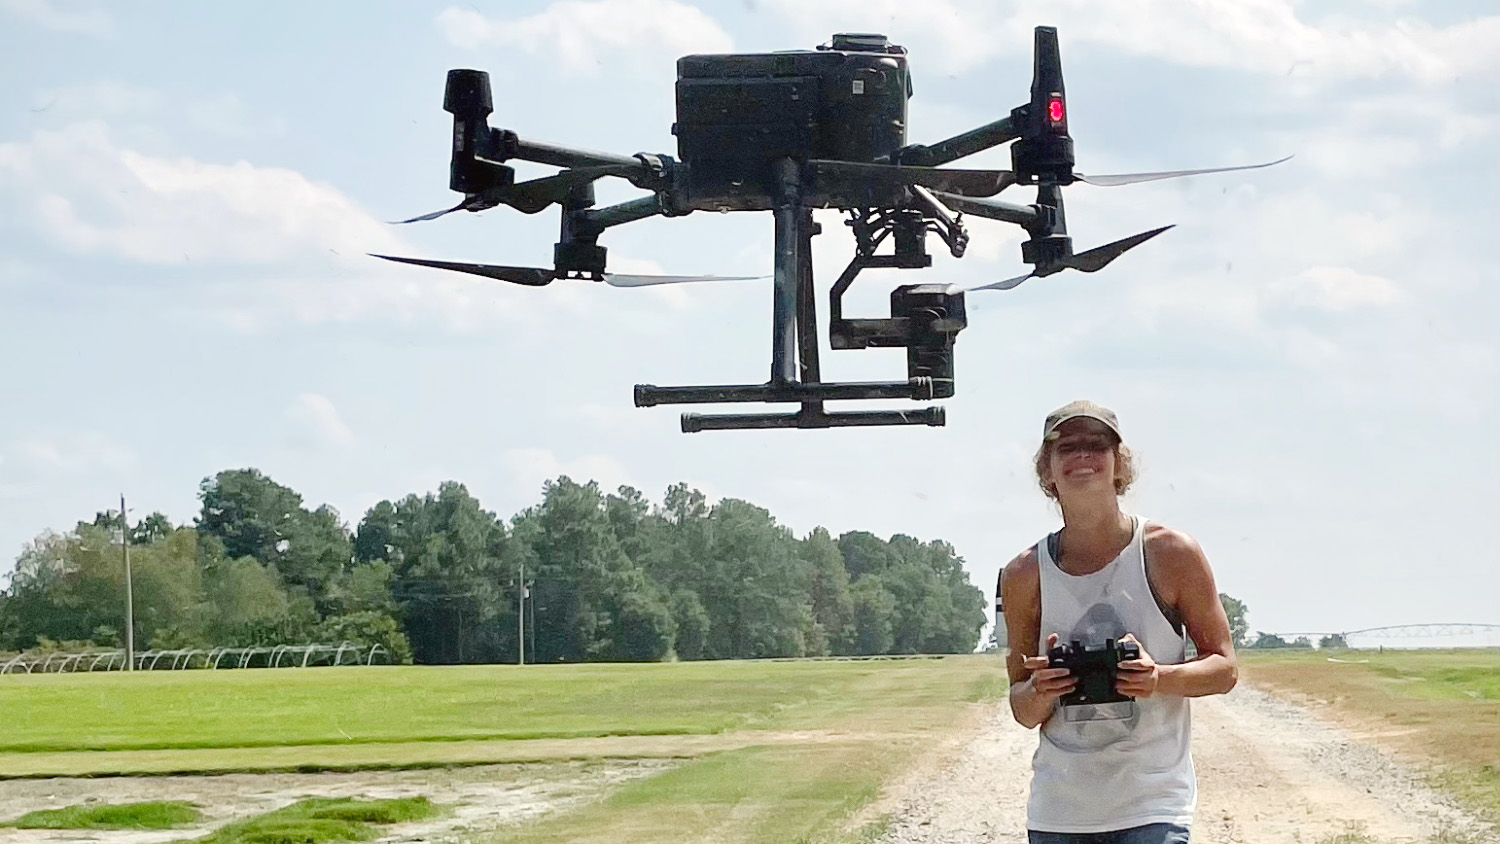 a woman flies a large drone over a turf grass field